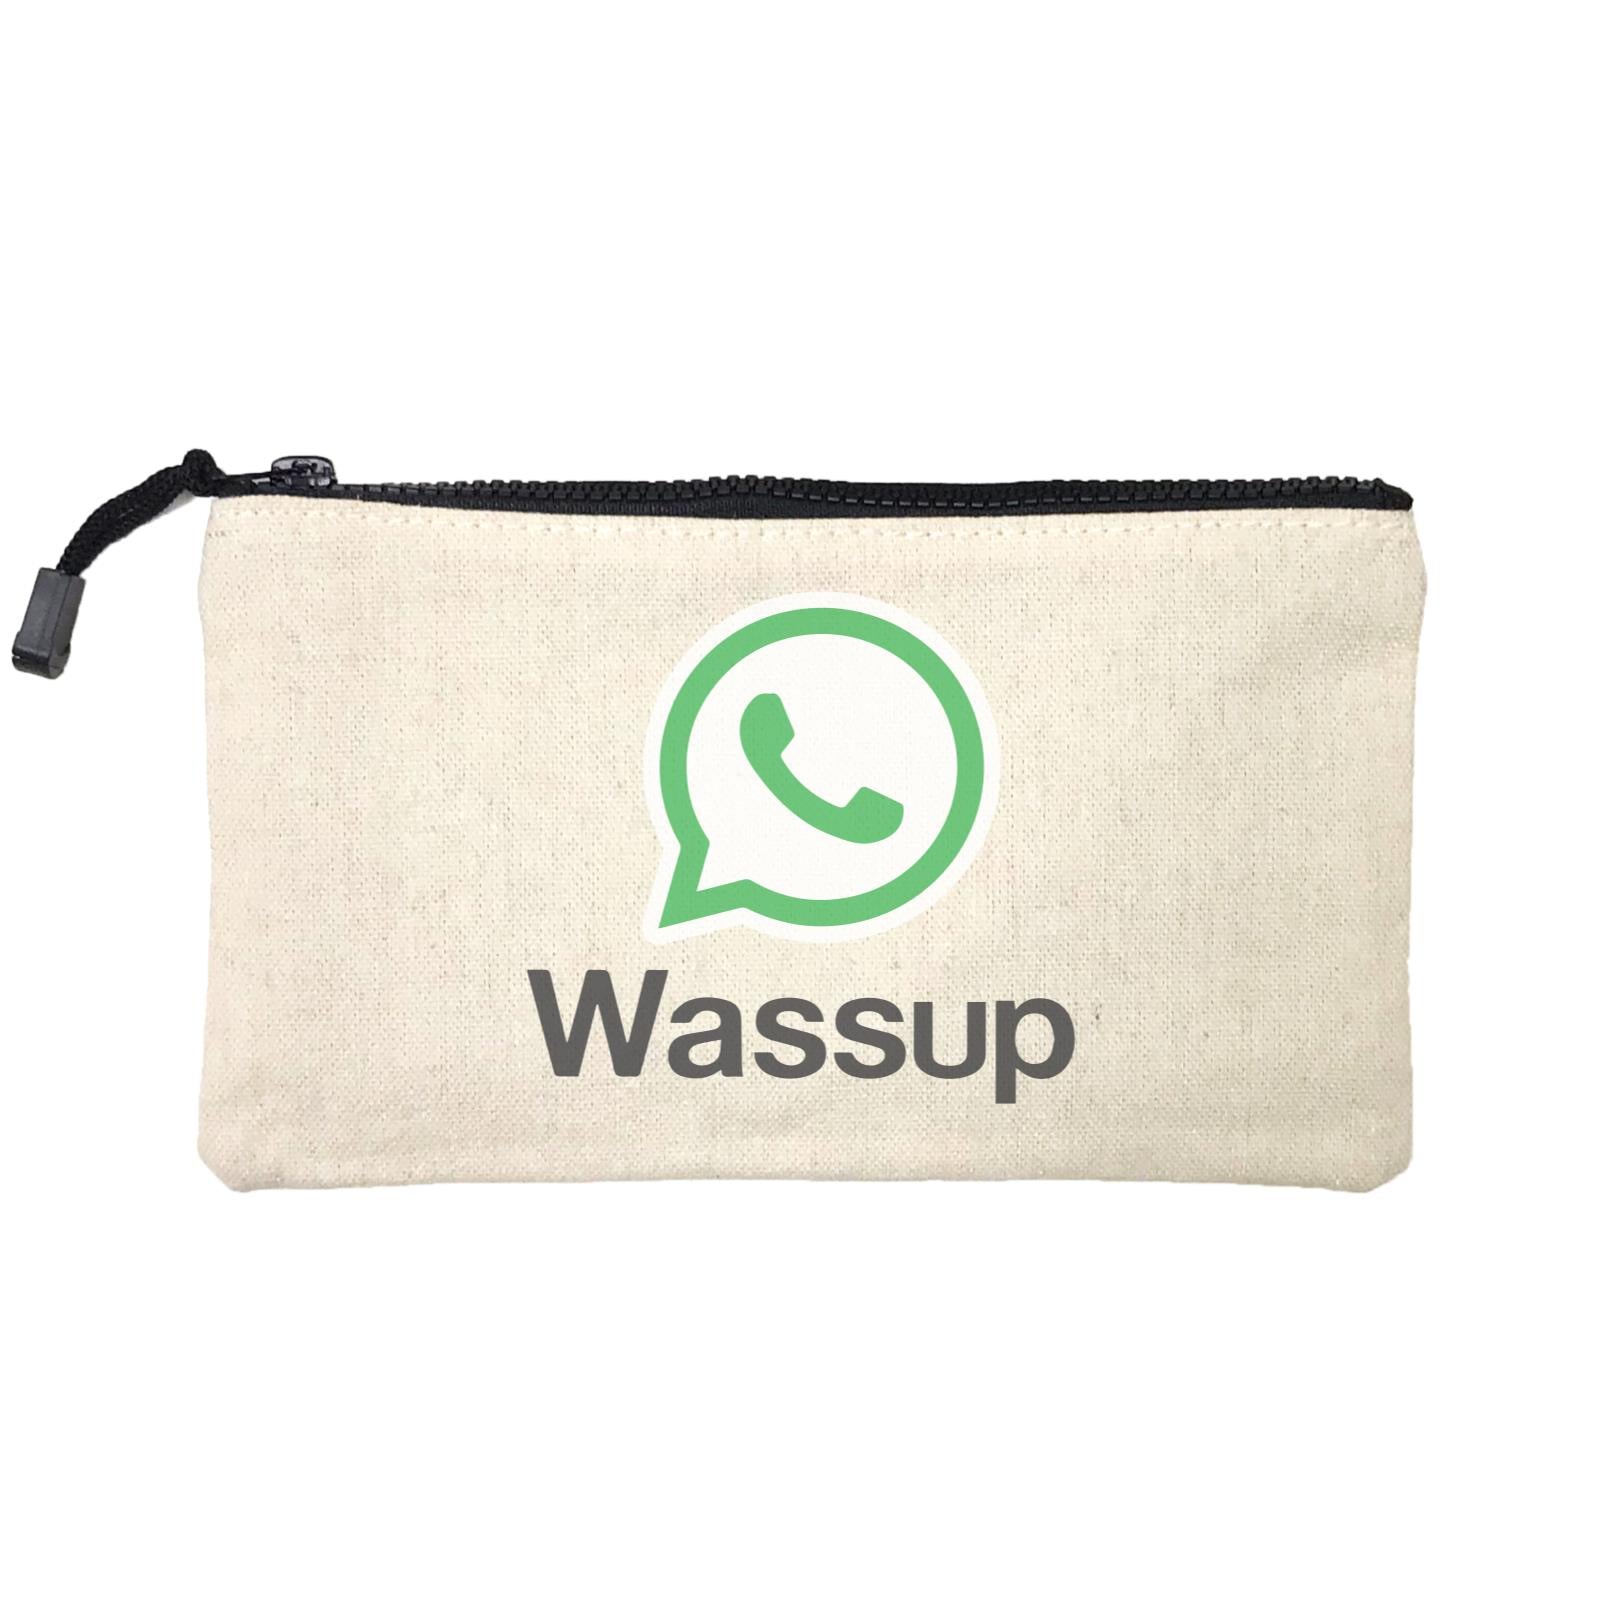 Slang Statement Wassup SP Stationery Pouch